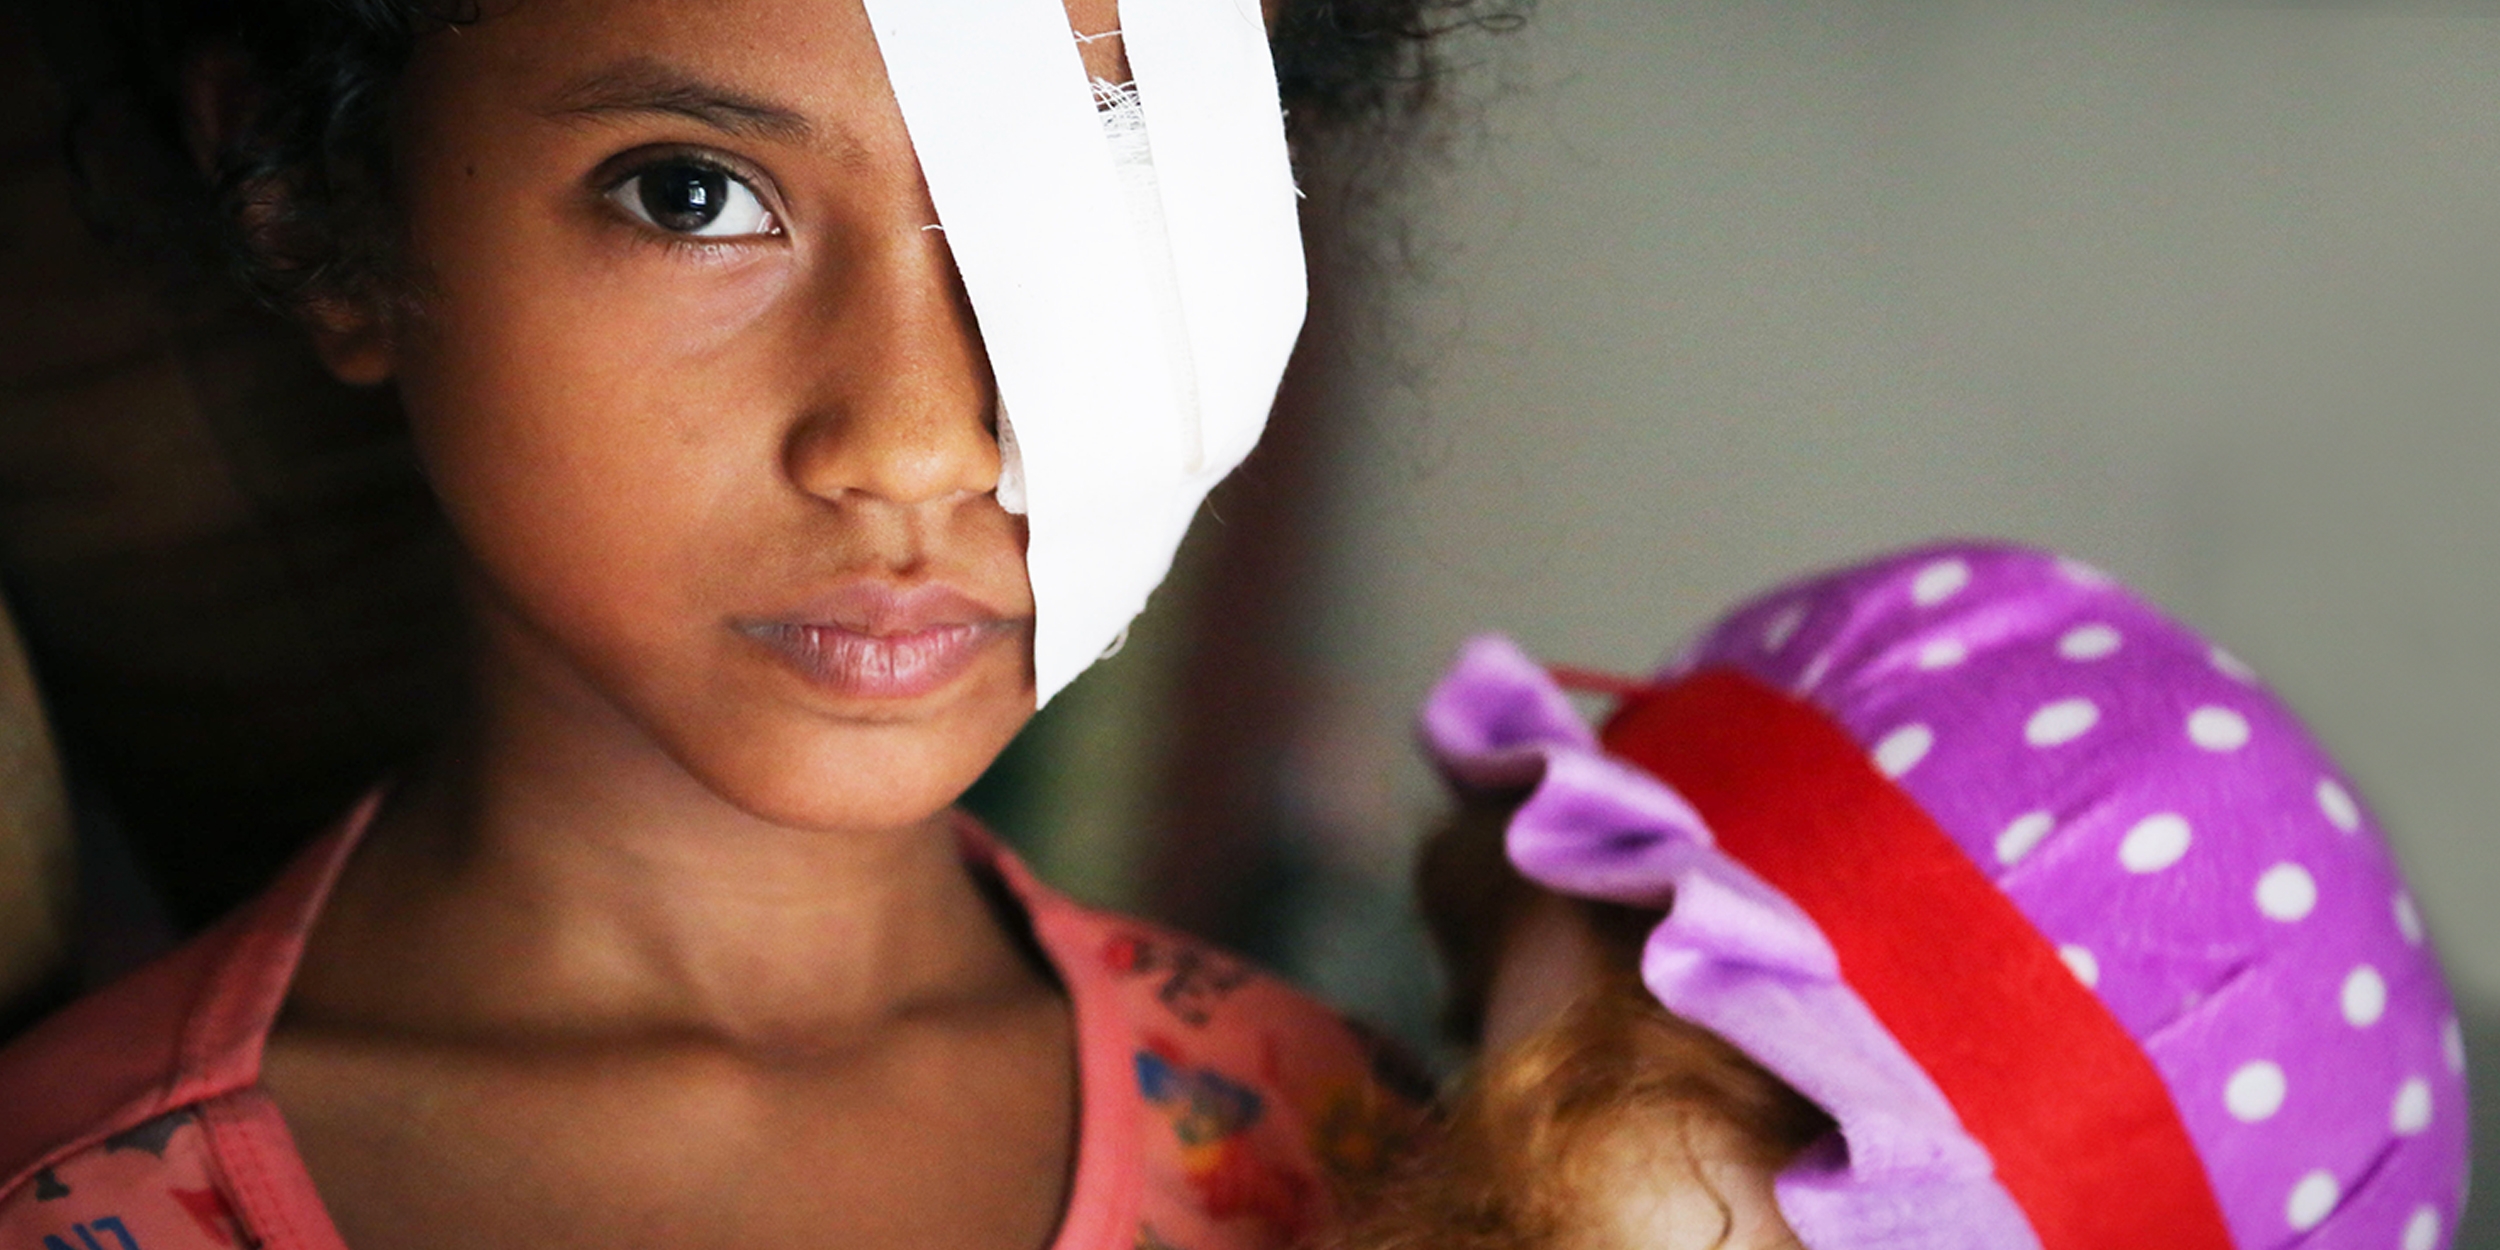 Eight-year-old Razan*s eye was seriously injured when she was hit by shrapnel during an airstrike in Hodeidah. Credit: Mohammed Awadh / Save the Children, July 2018 